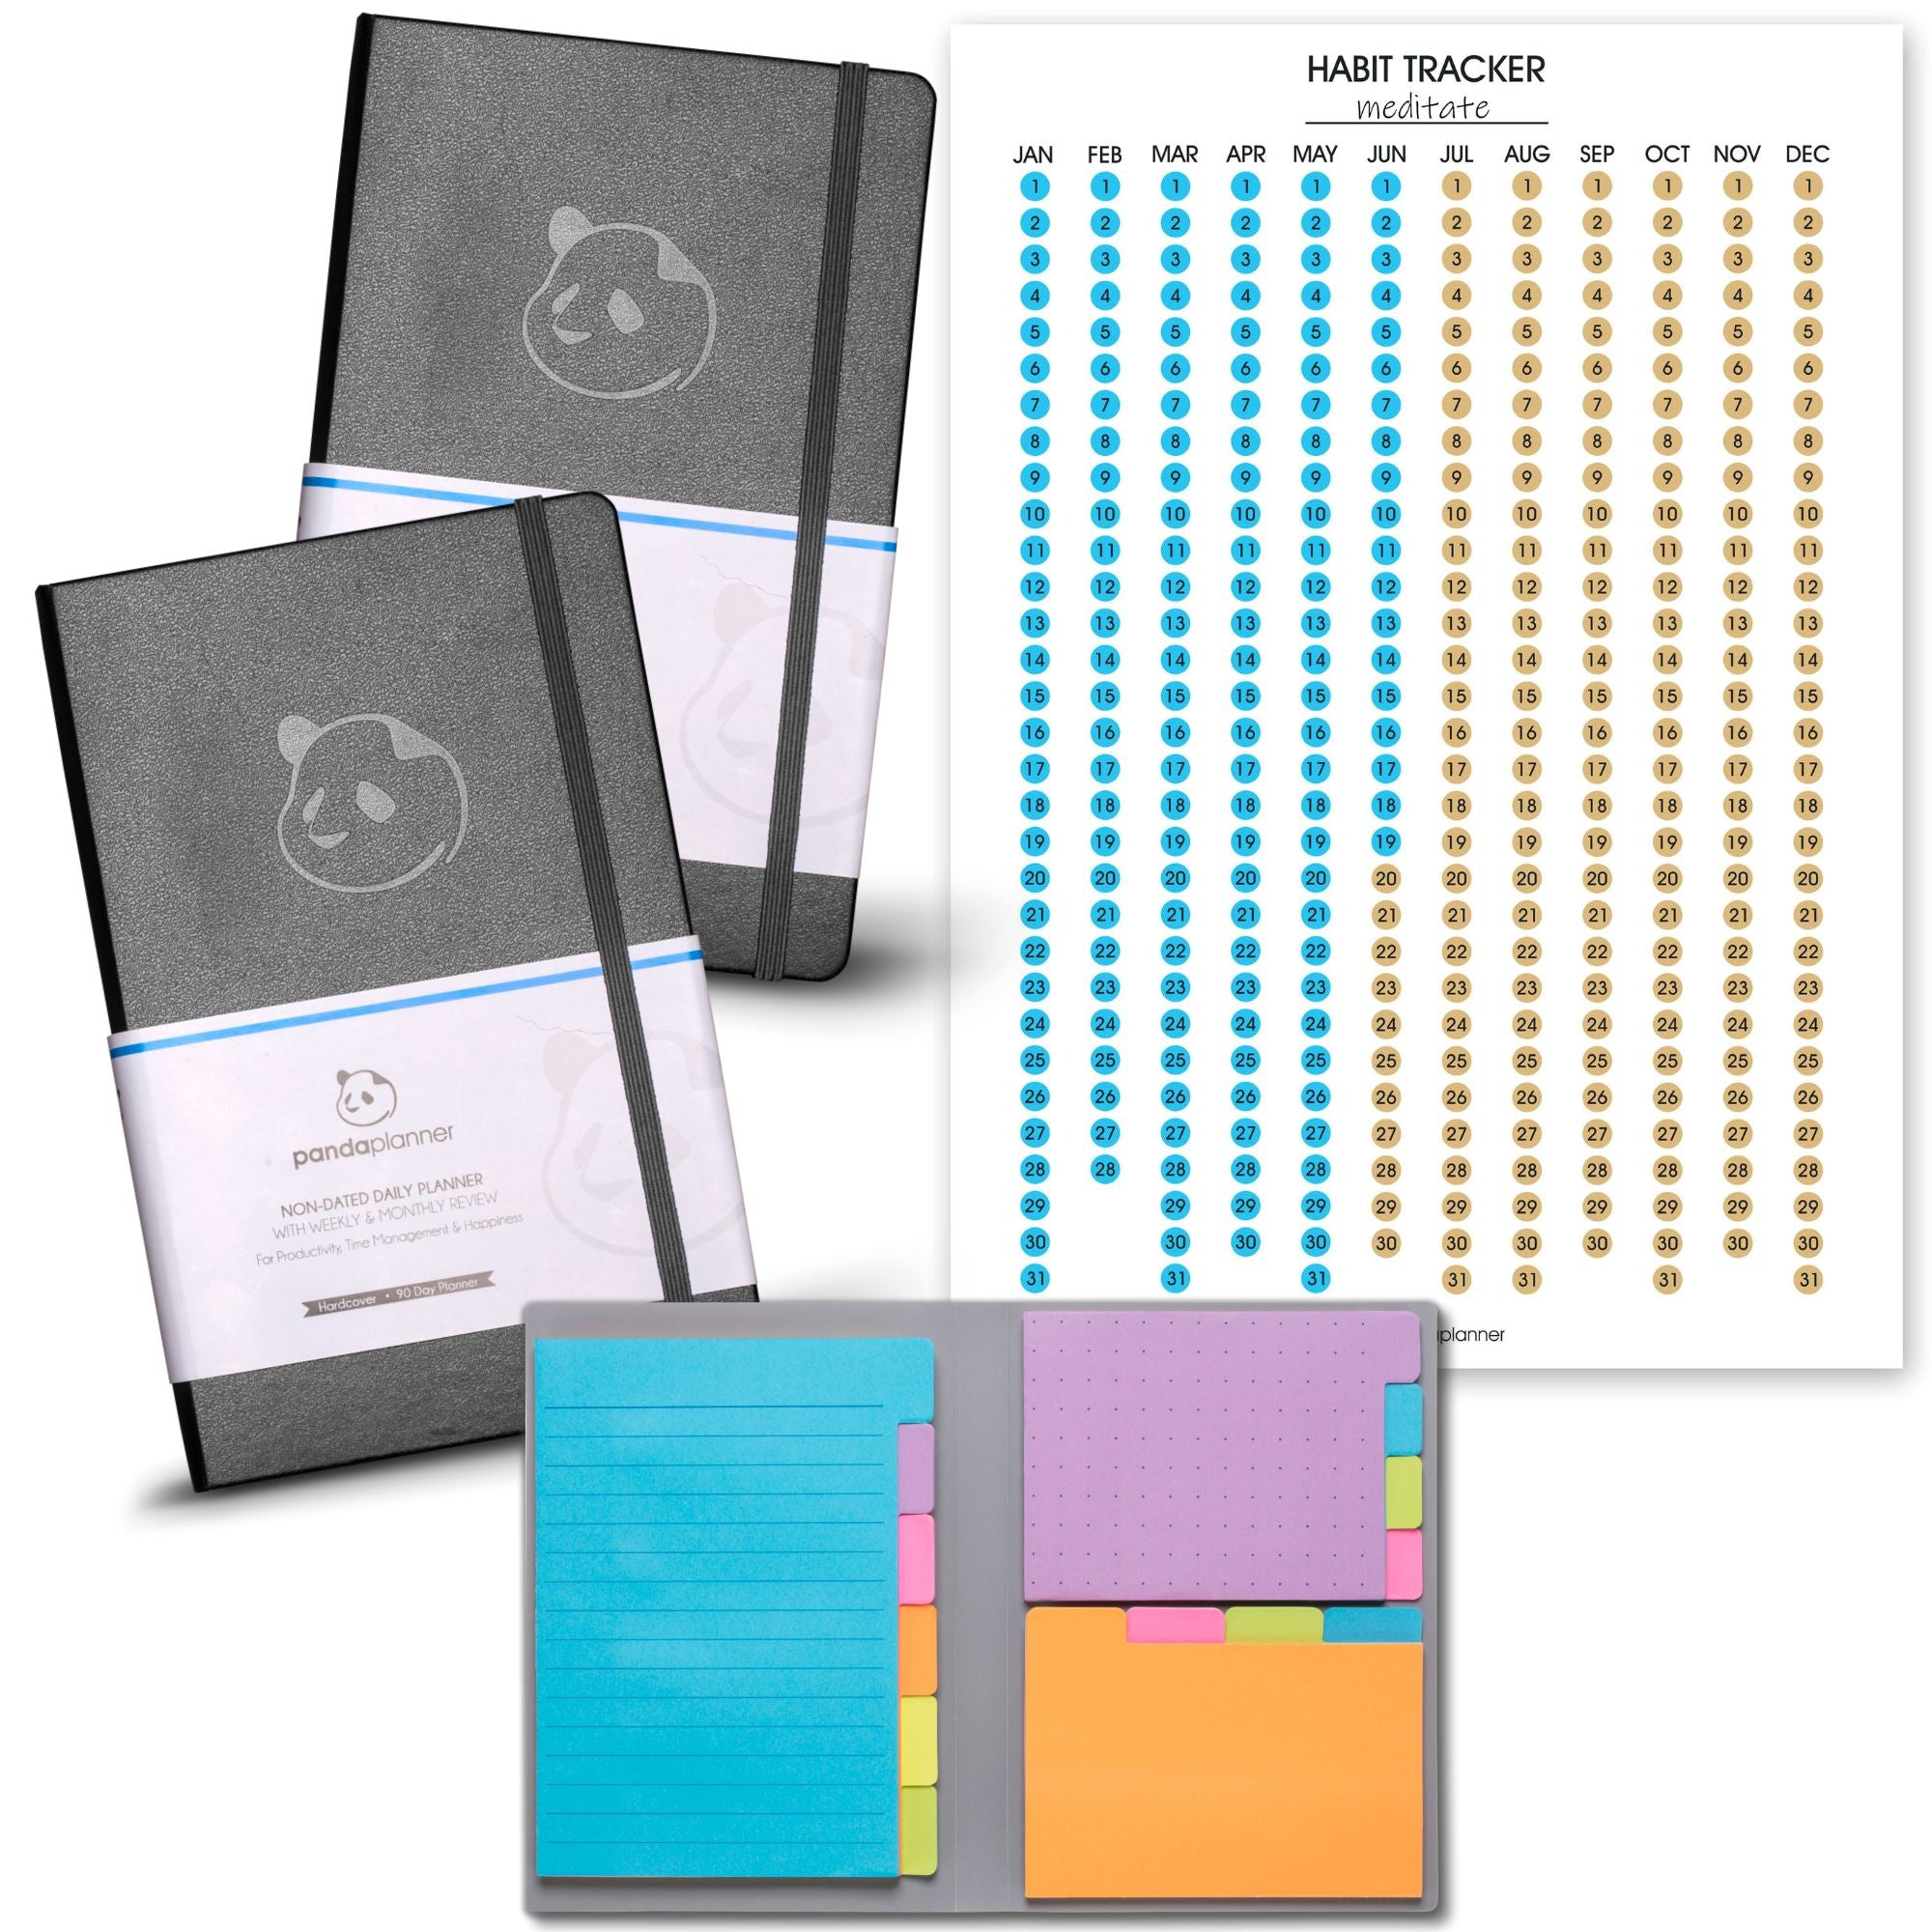 2 x 3 Month Planners & Sticky Notes & Habit Tracker Poster Panda Planner 2 x Black 3 Month Planners + Classic Sticky Notes + Full Year Habit Tracker 